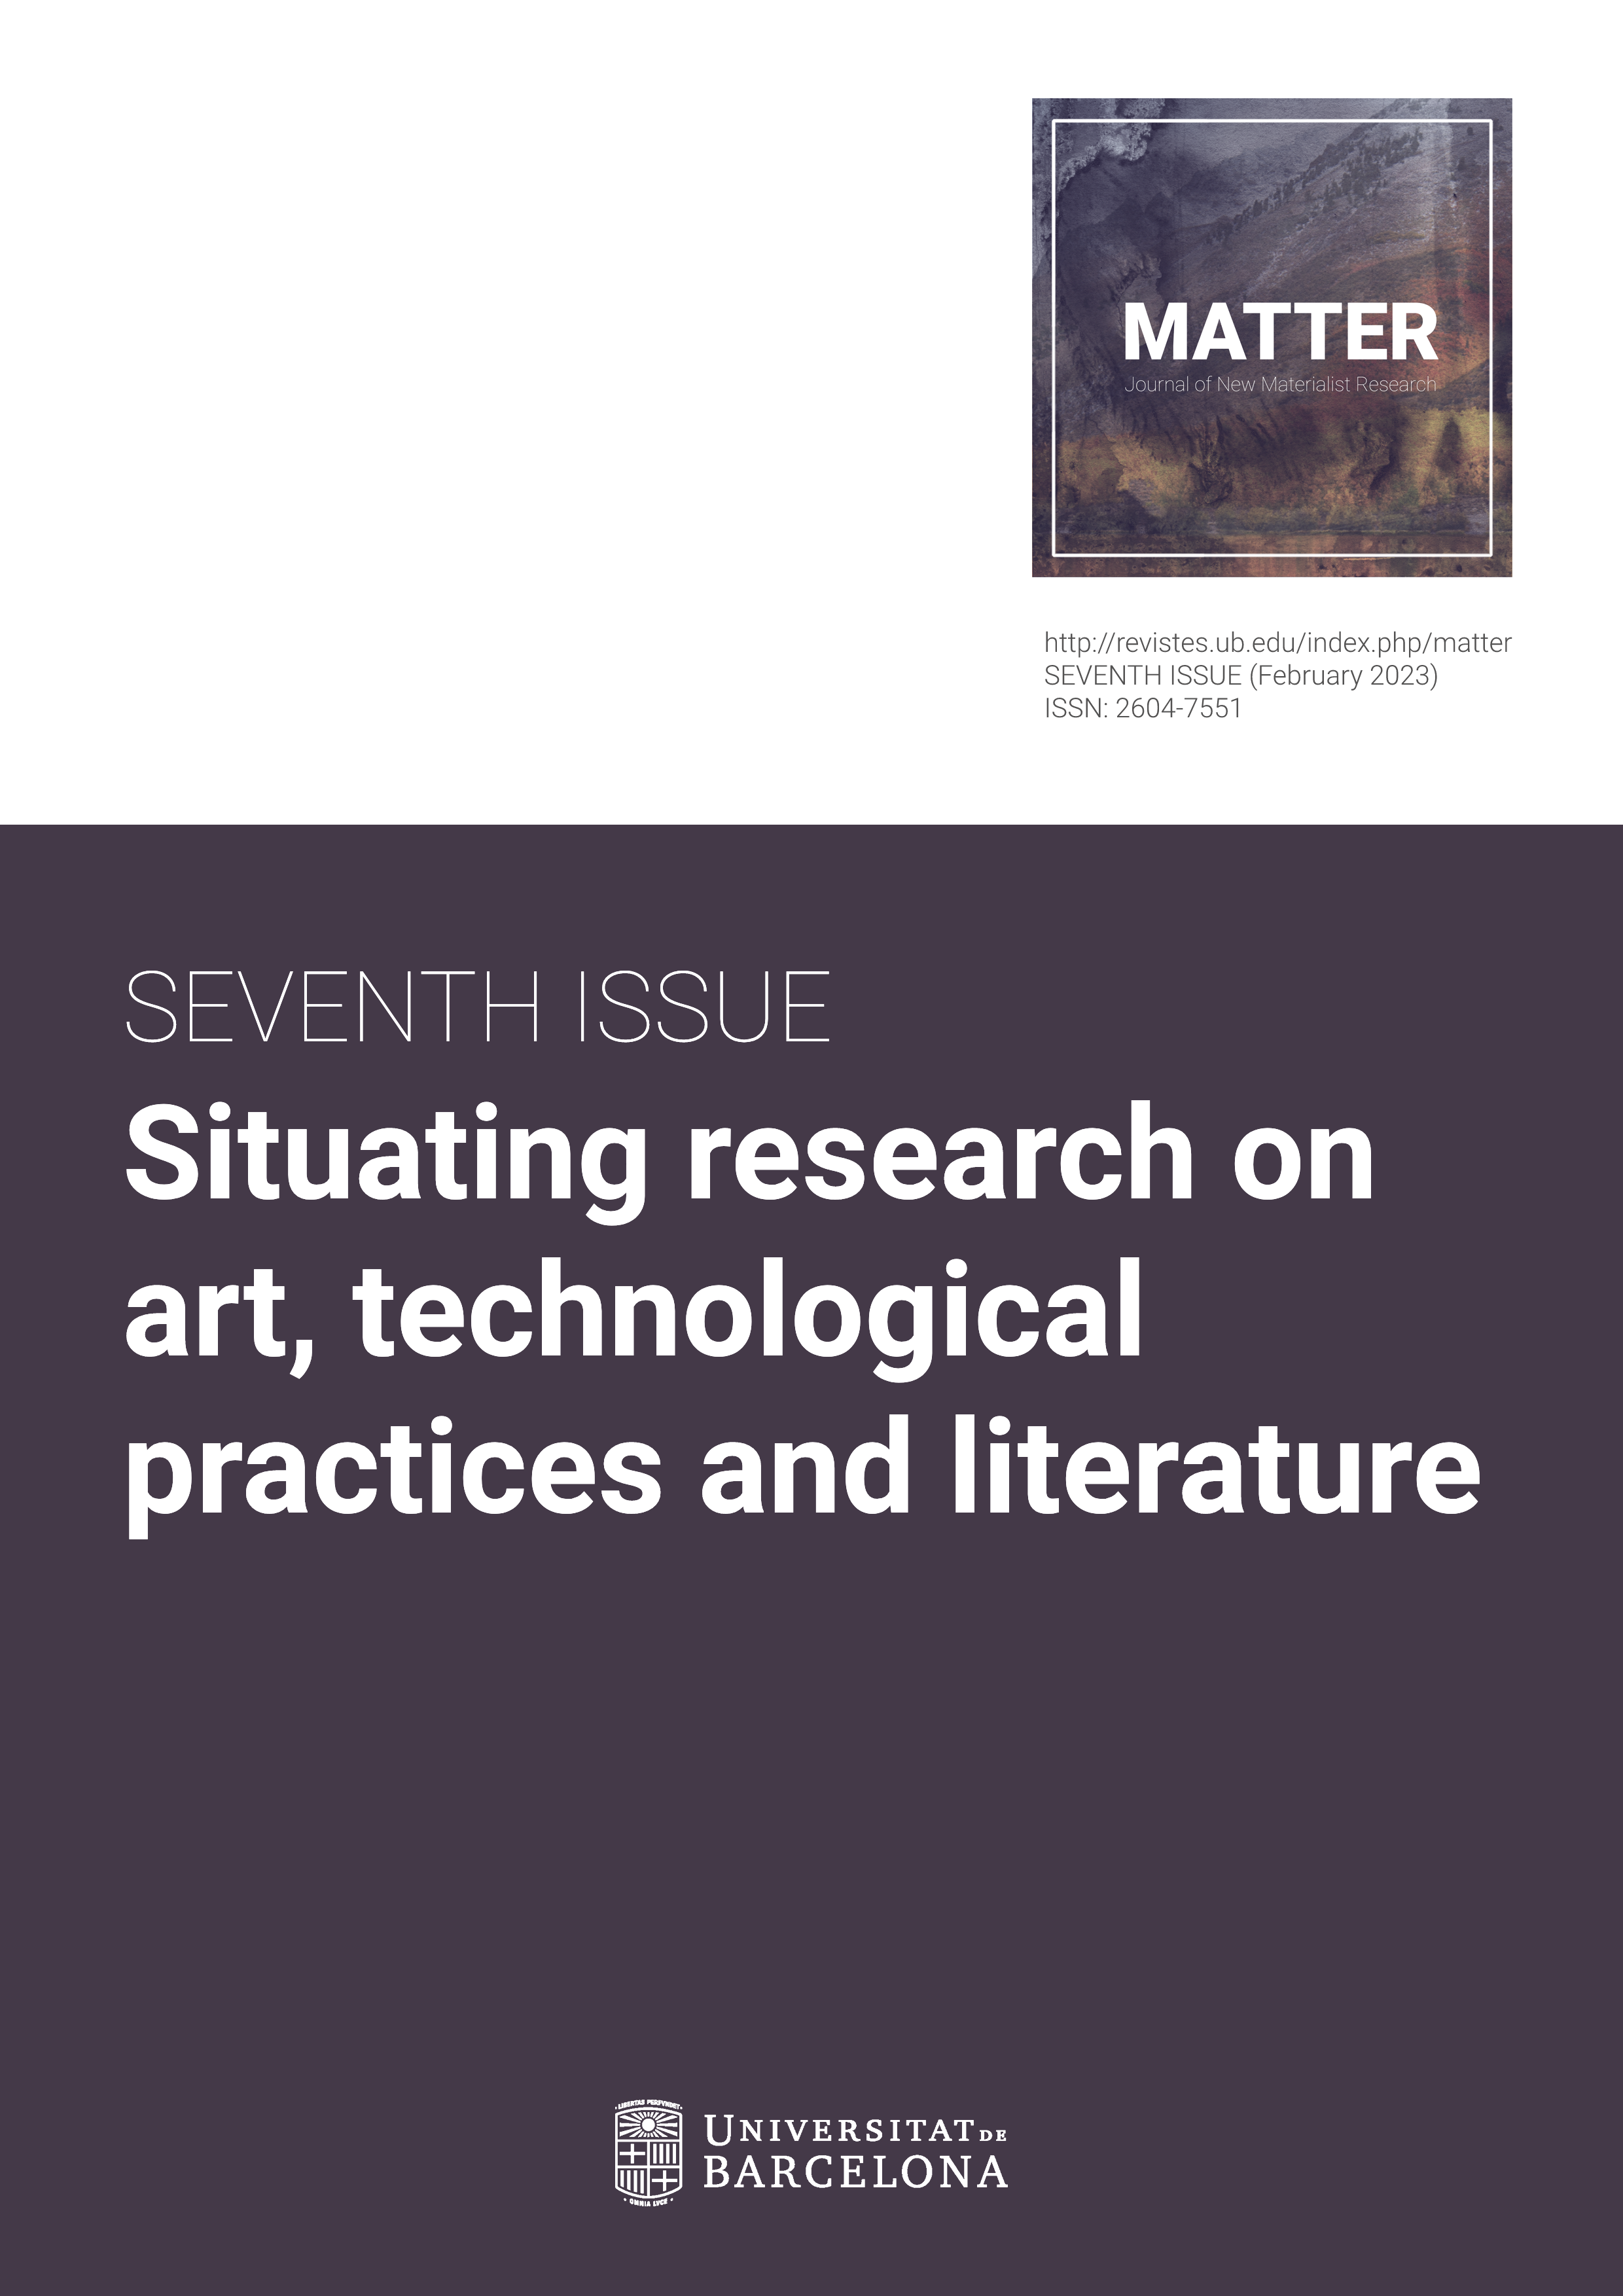 					View Vol. 7 (2023): Situating research on art, technological practices and literature
				